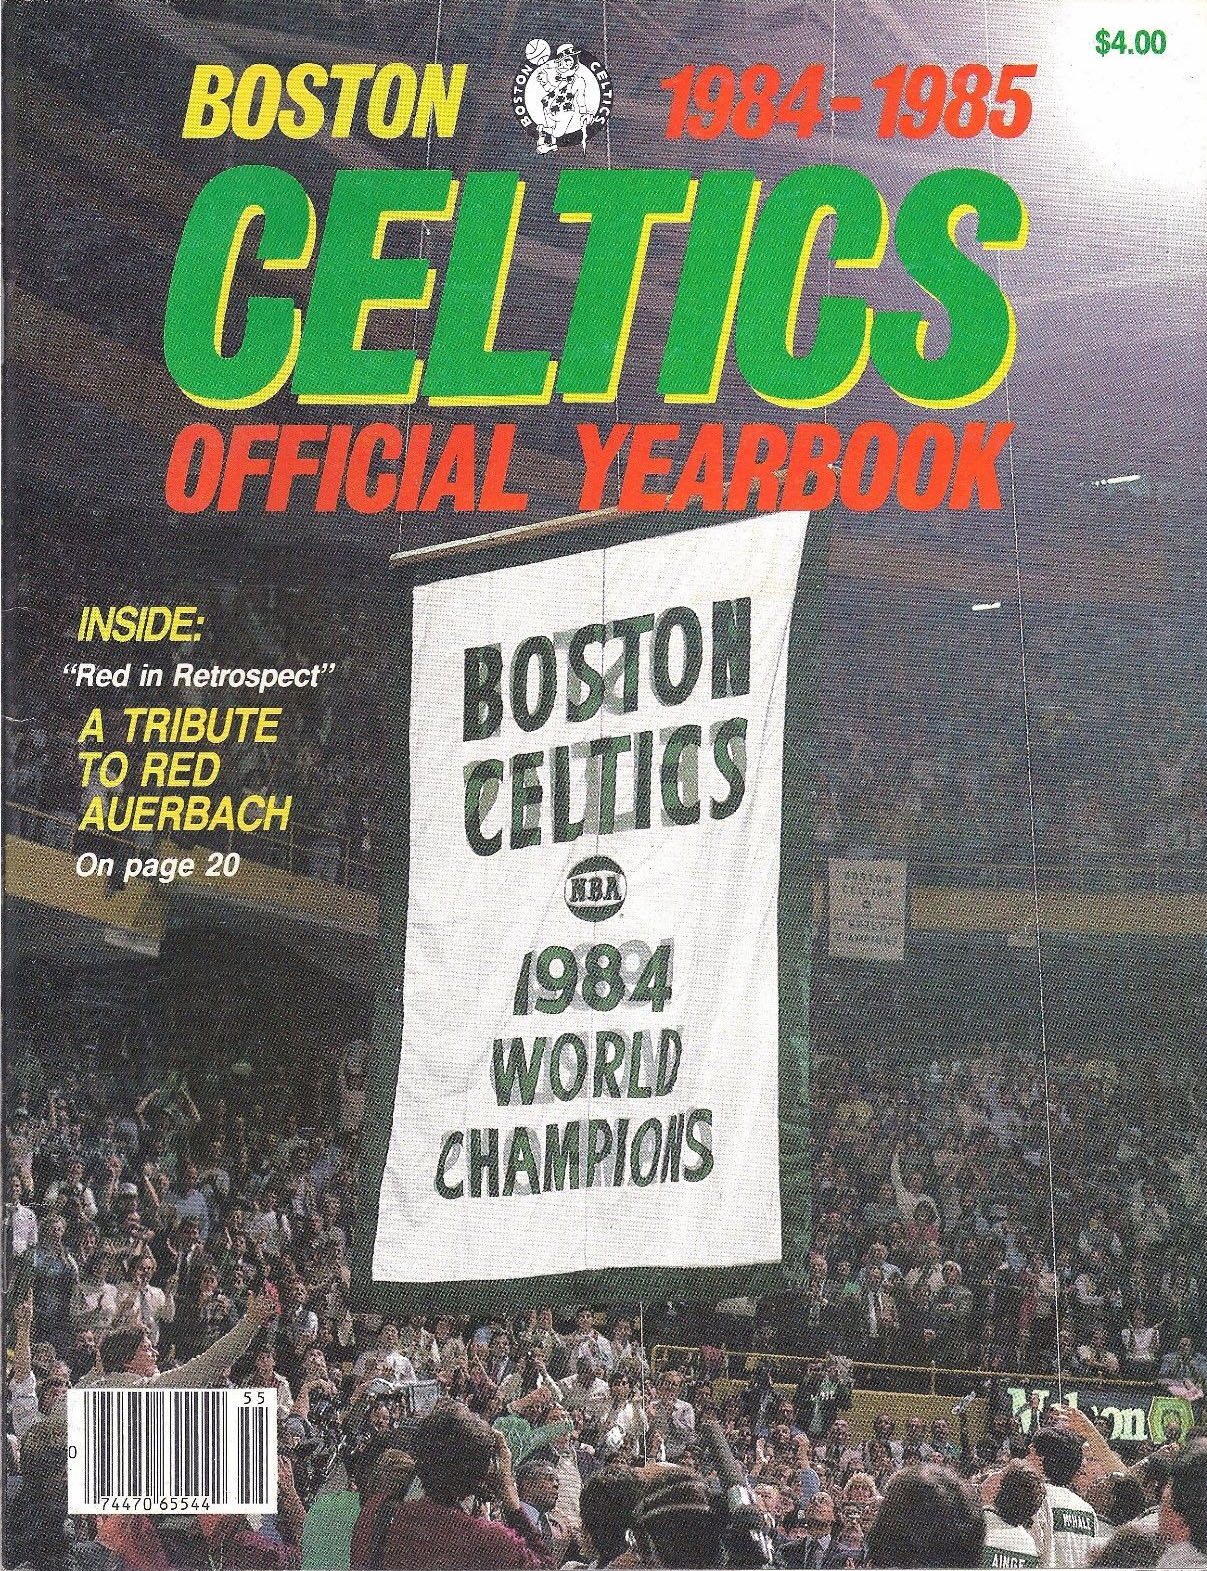 Boston Celtics Media Guides and Yearbooks SportsPaper.info